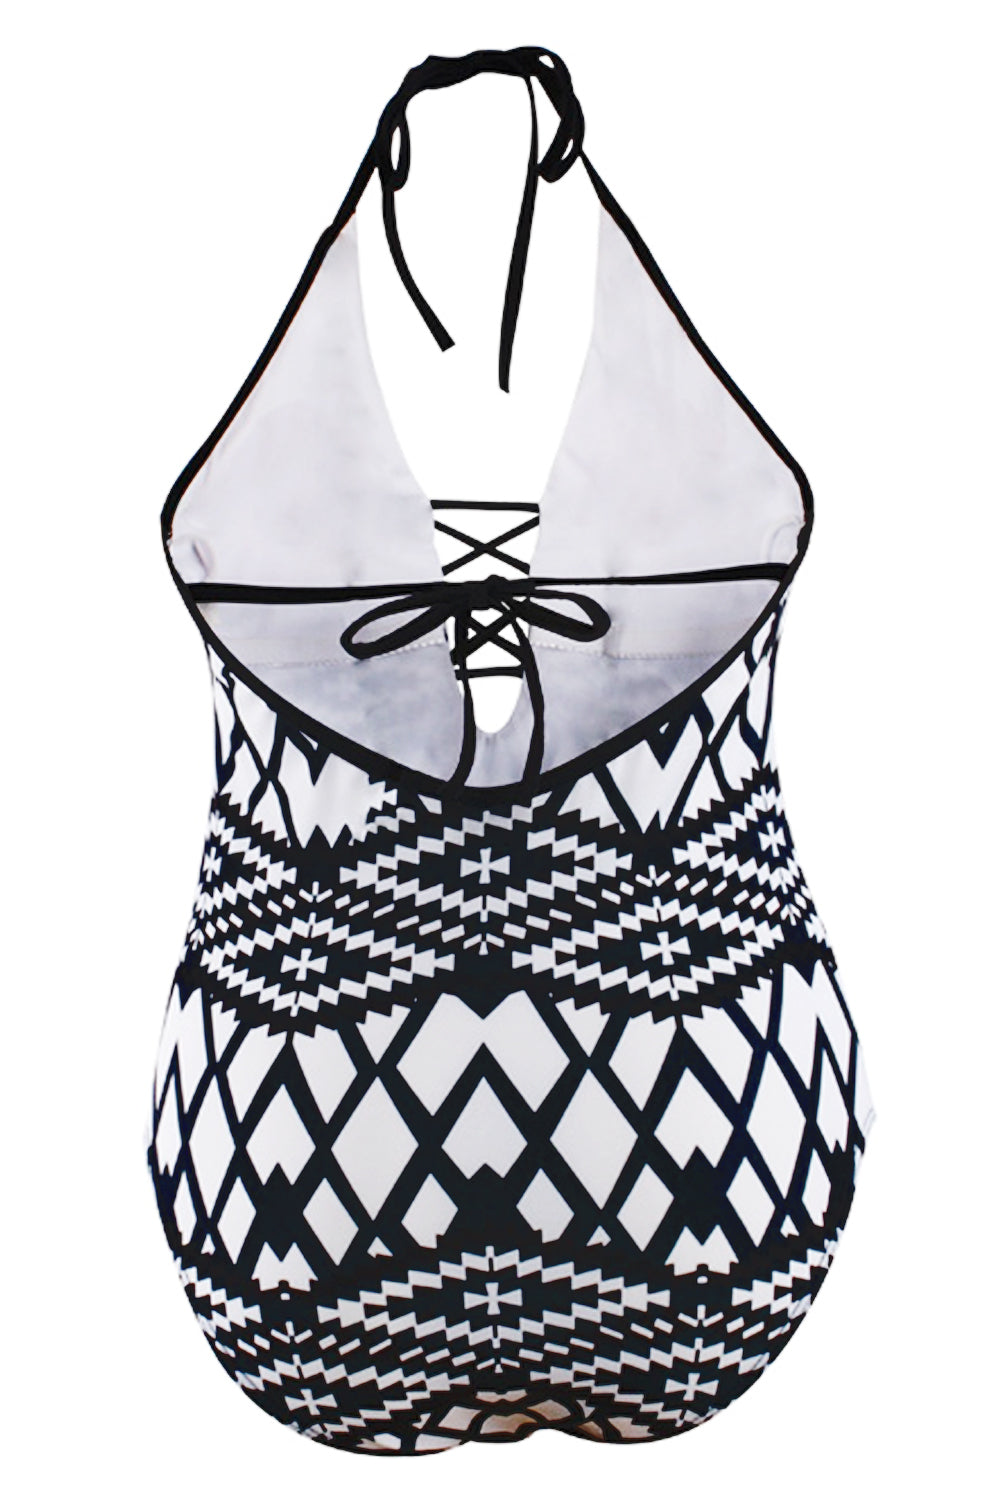 Iyasson Diamond printing With Strappy Detailing One-piece Swimsuit